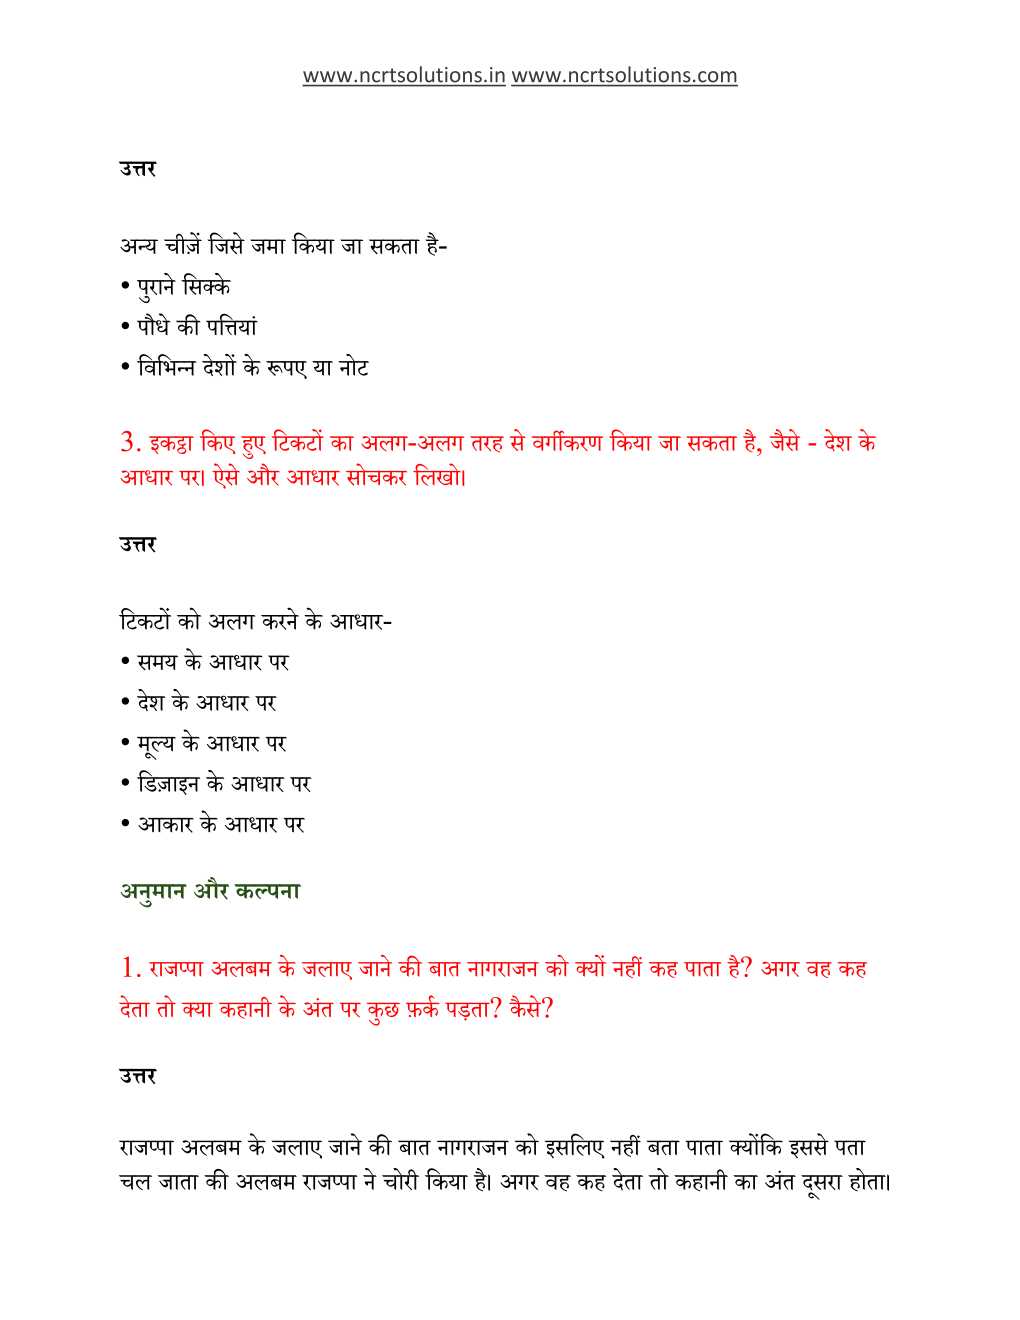 NCERT Solutions For Class 6 Hindi Vasant Chapter 9